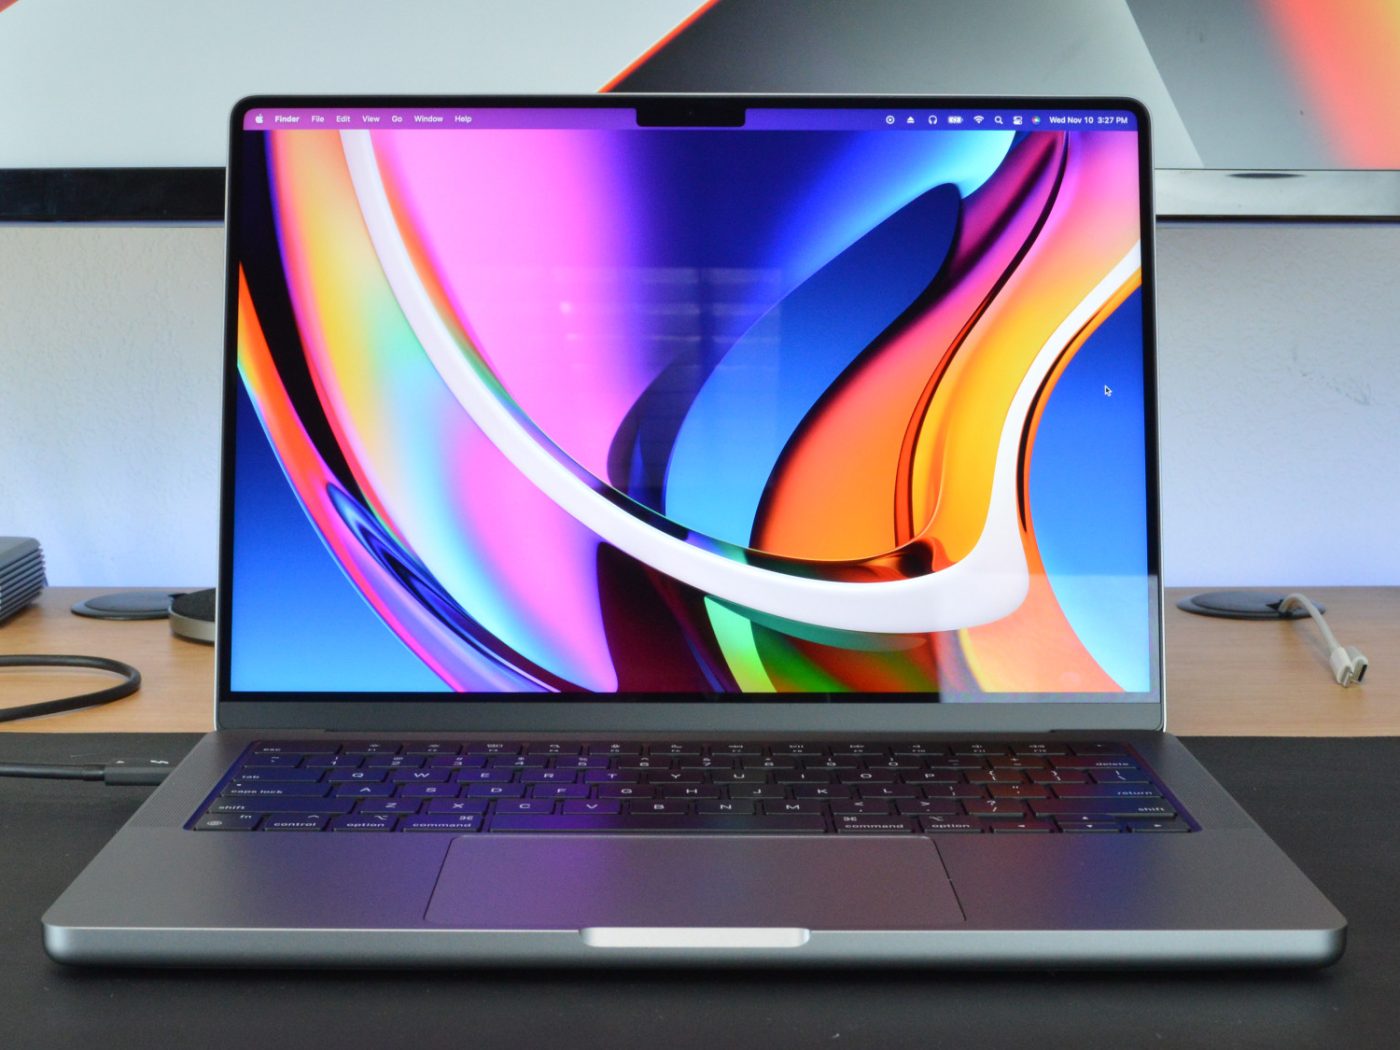 Here's how a $3,300 MacBook Pro can save you money, according a Reddit